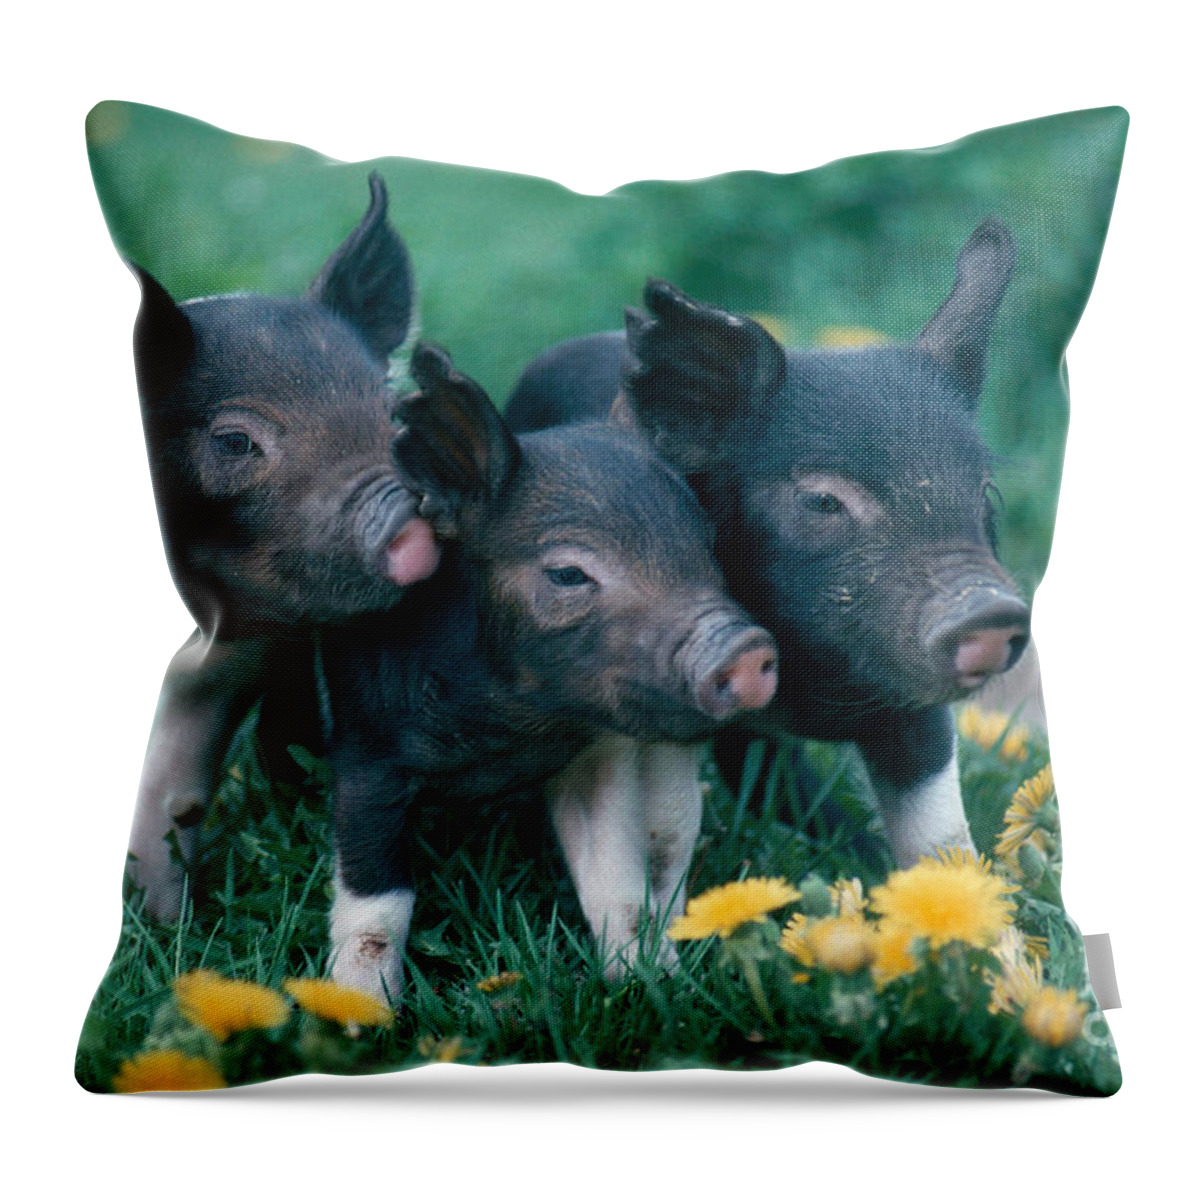 Nature Throw Pillow featuring the photograph Piglets by Alan and Sandy Carey